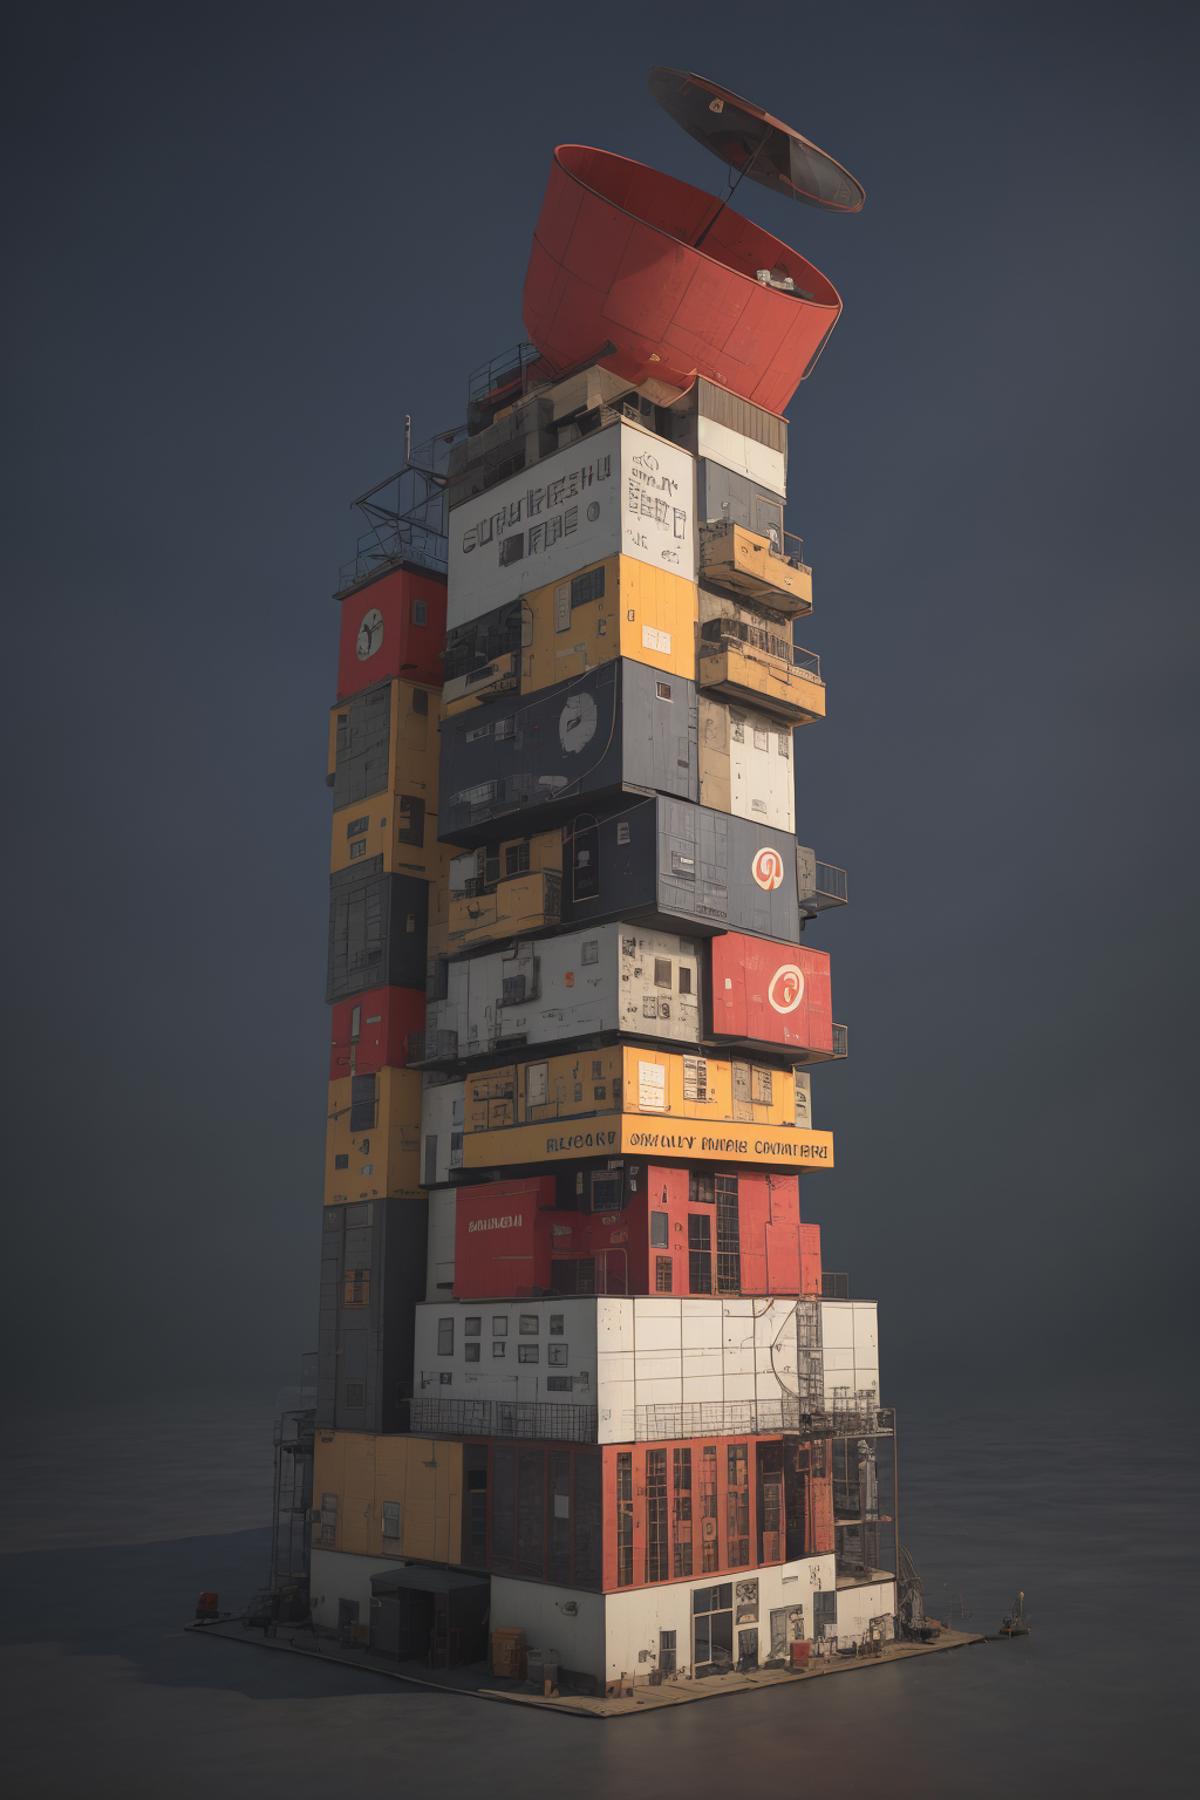 Container building,集装箱概念场景,建筑,末日废土 image by ChaosOrchestrator